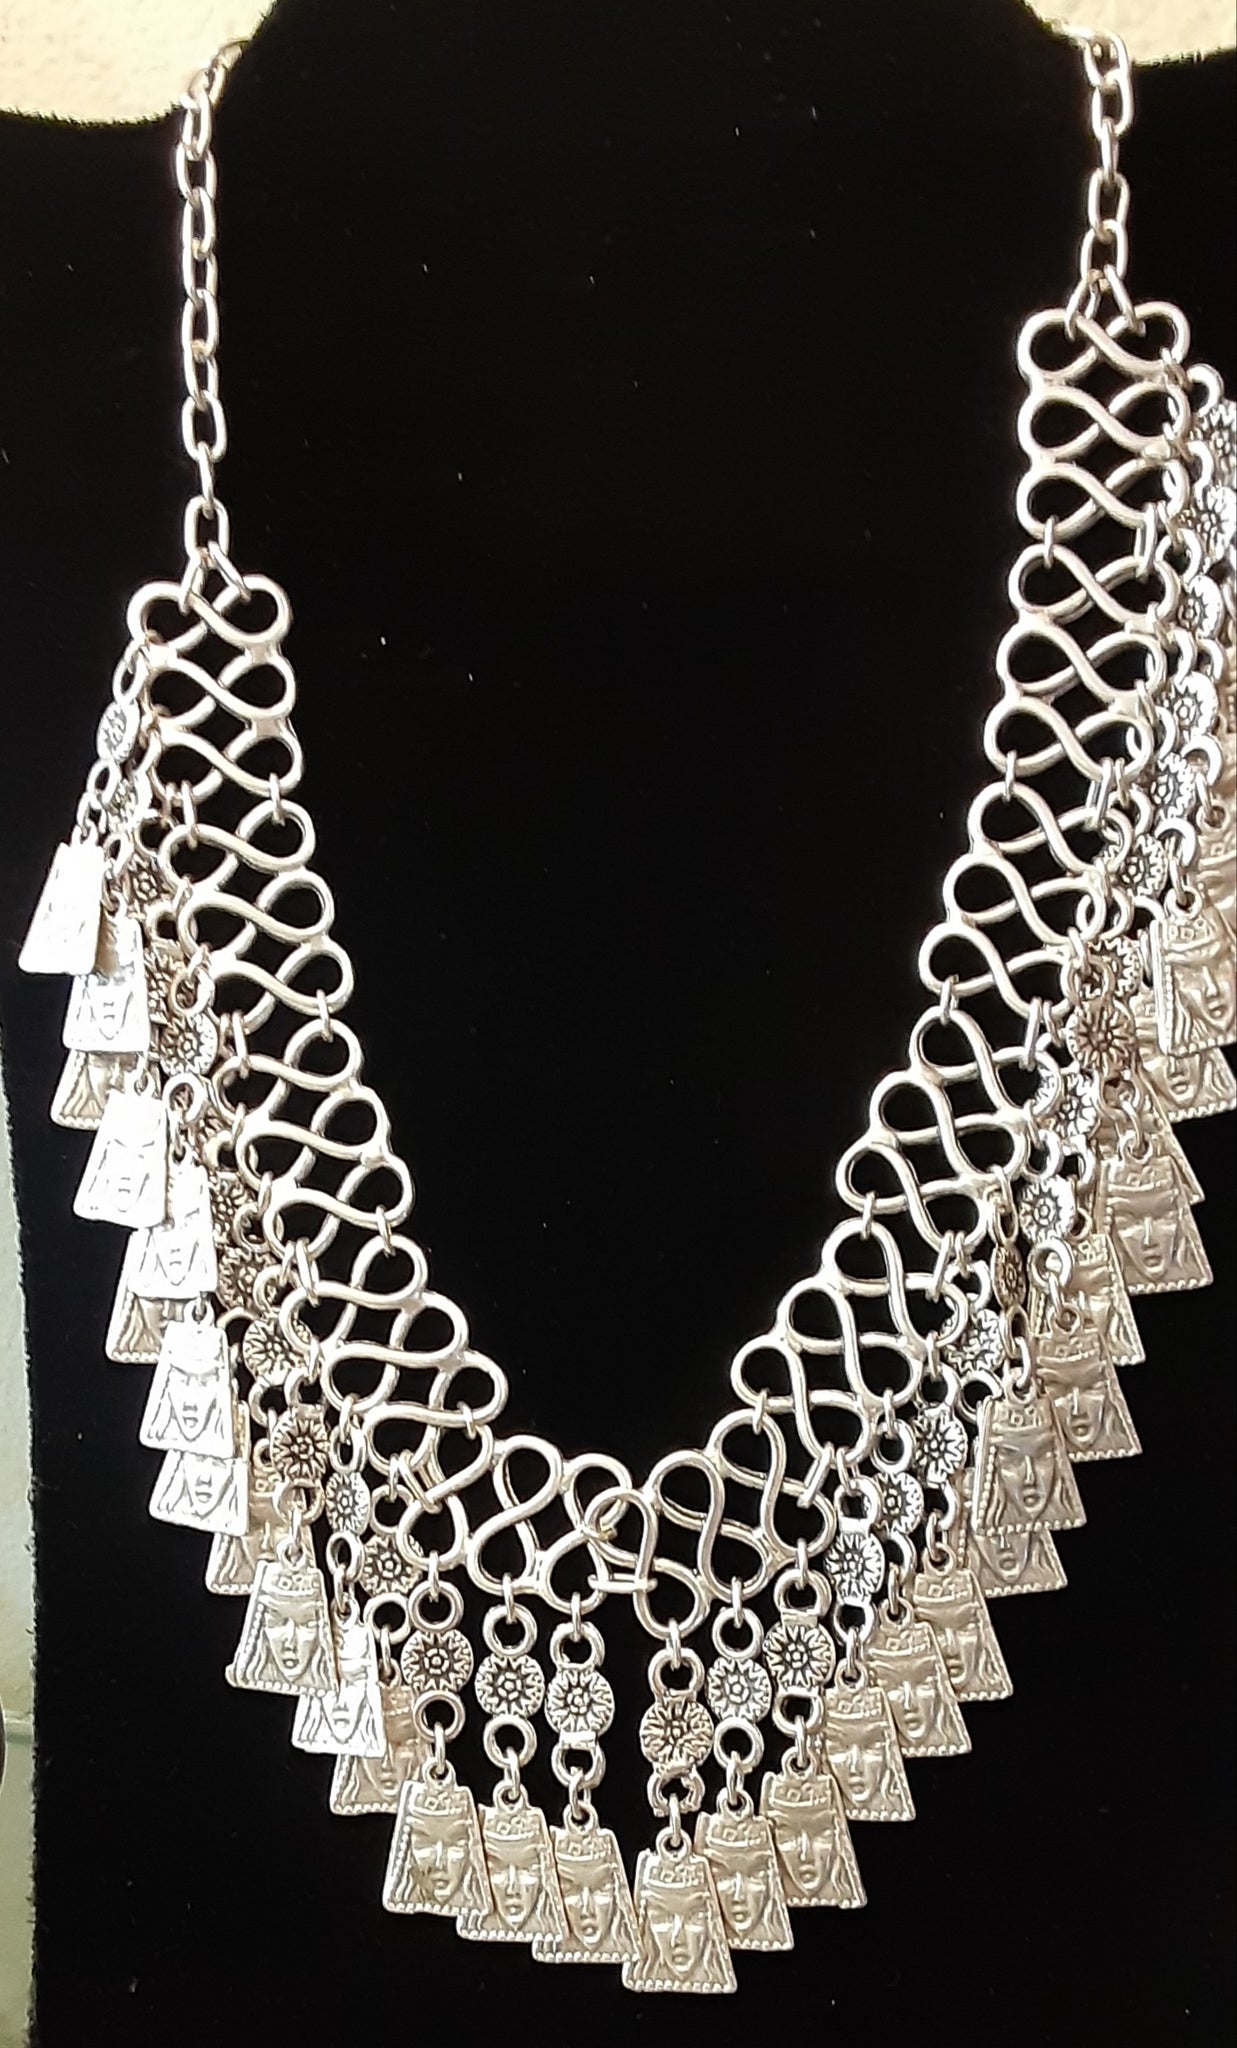 Turkish Necklace ~ Multi-Dangled Chainmail